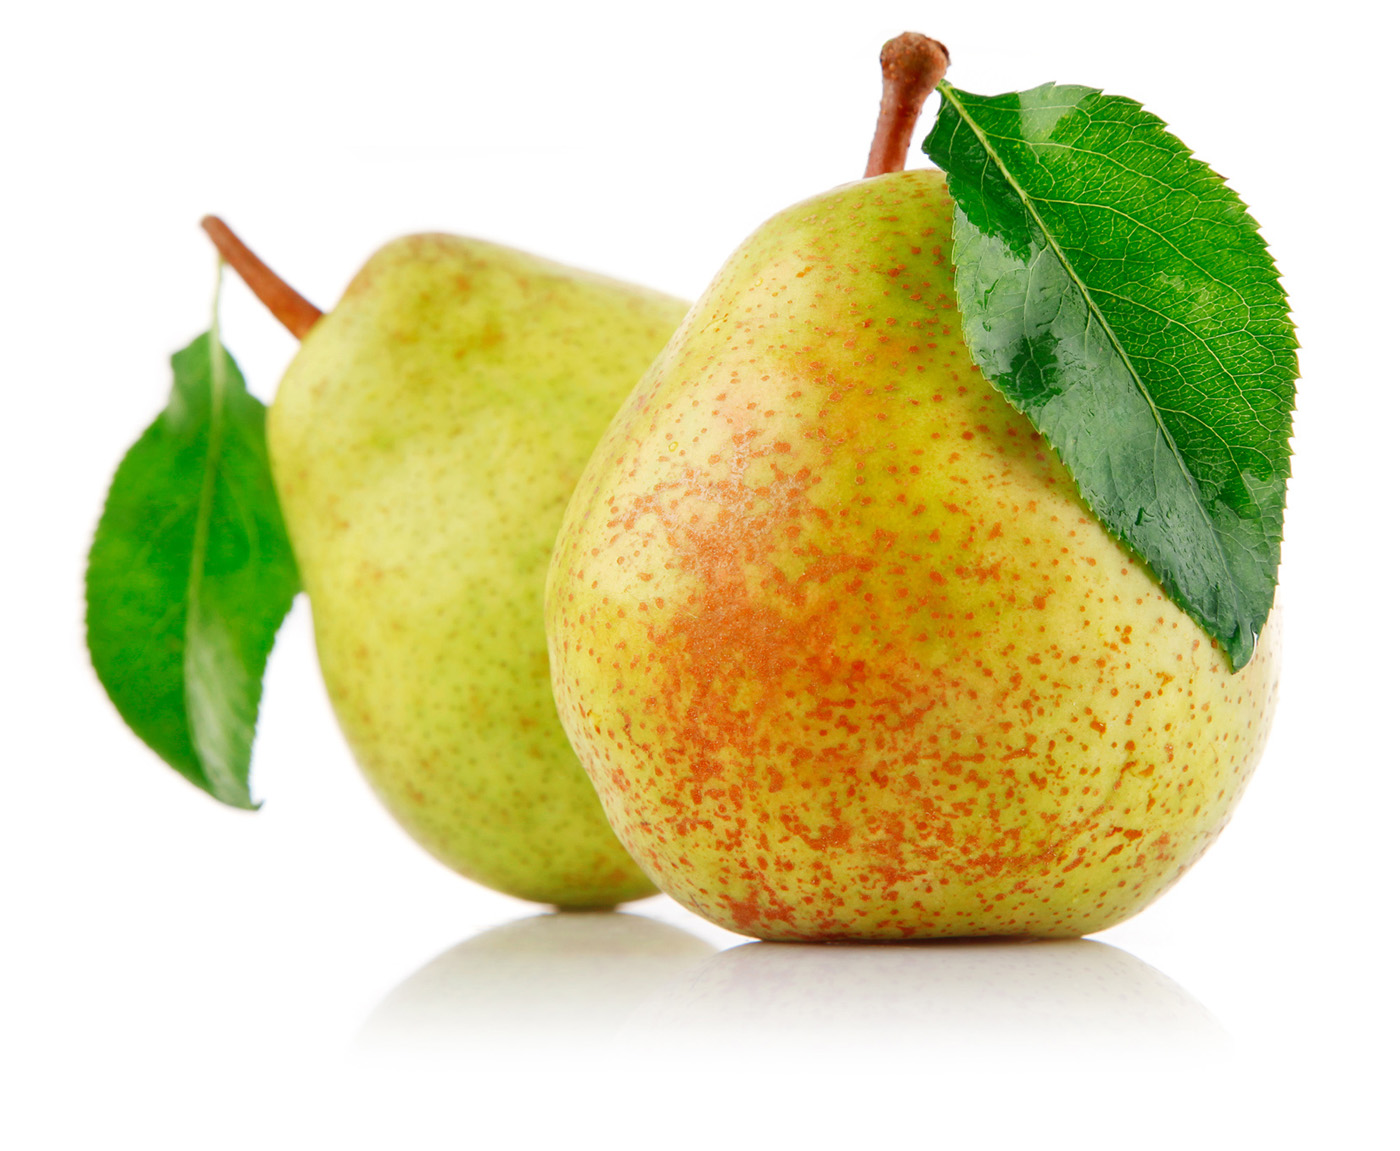 New Image Pear Wallpaper Amazing Collection